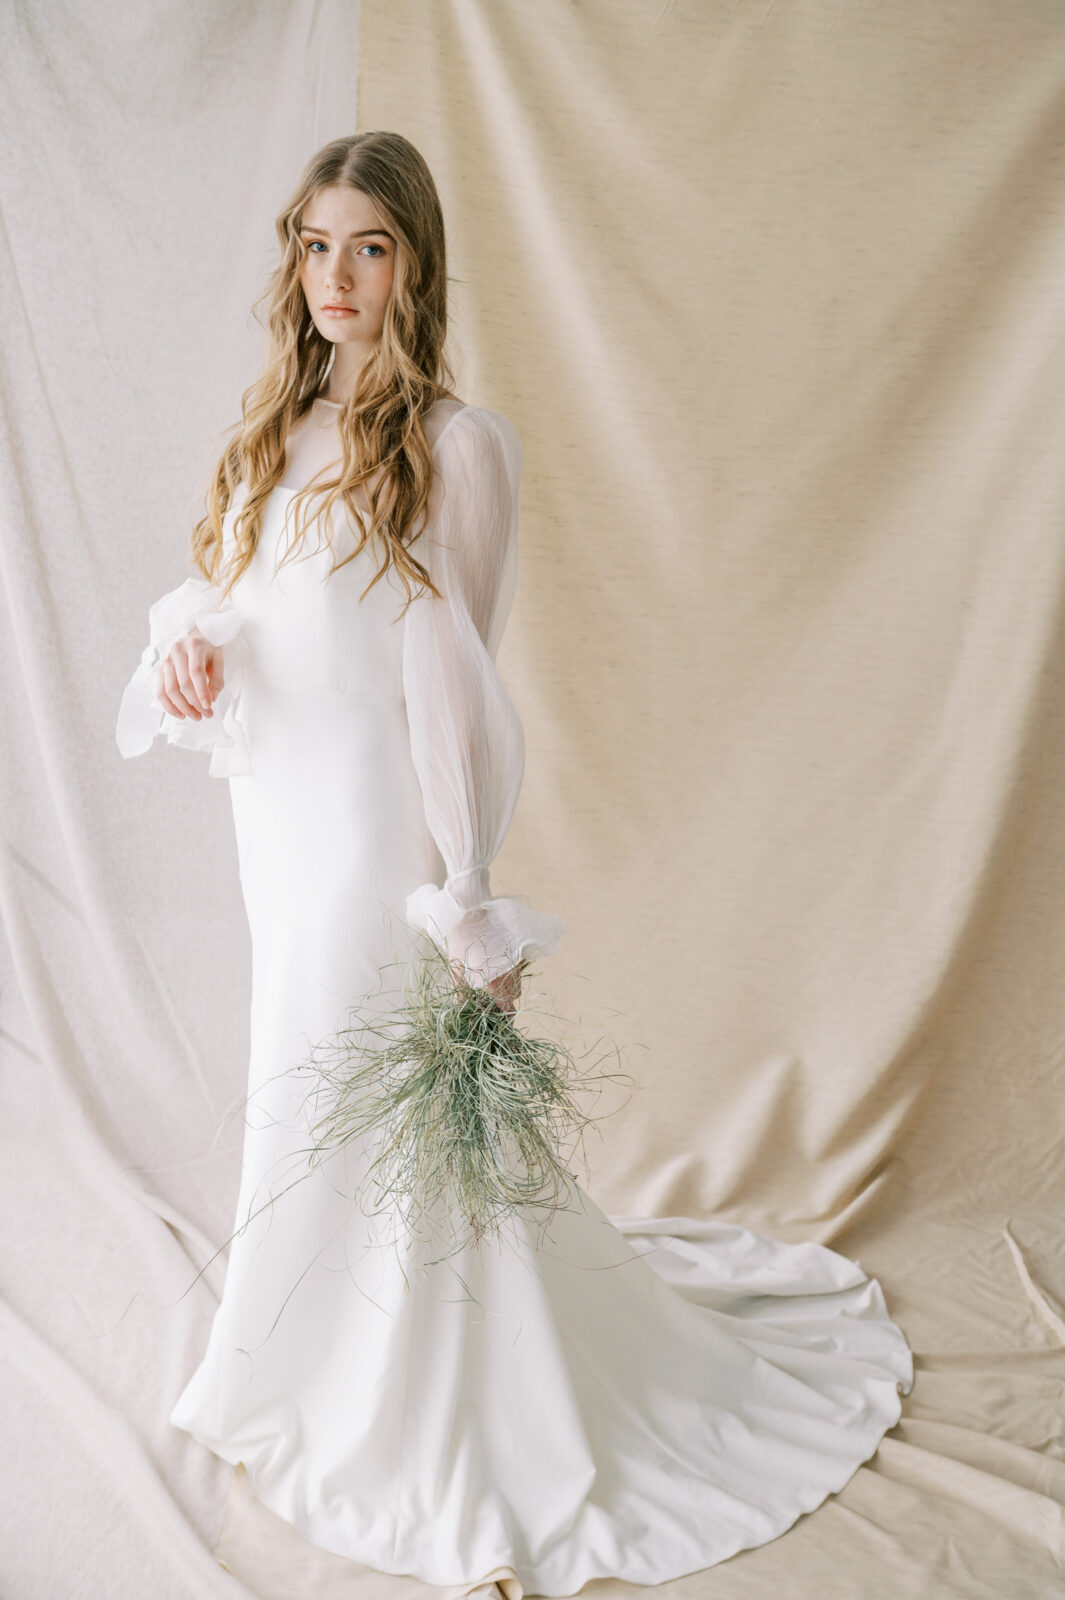 A New Wave of "Boho" Bridal is here, emphasizing Texture, Earth Tones, & Natural Minimalism | featured on Brontë Bride